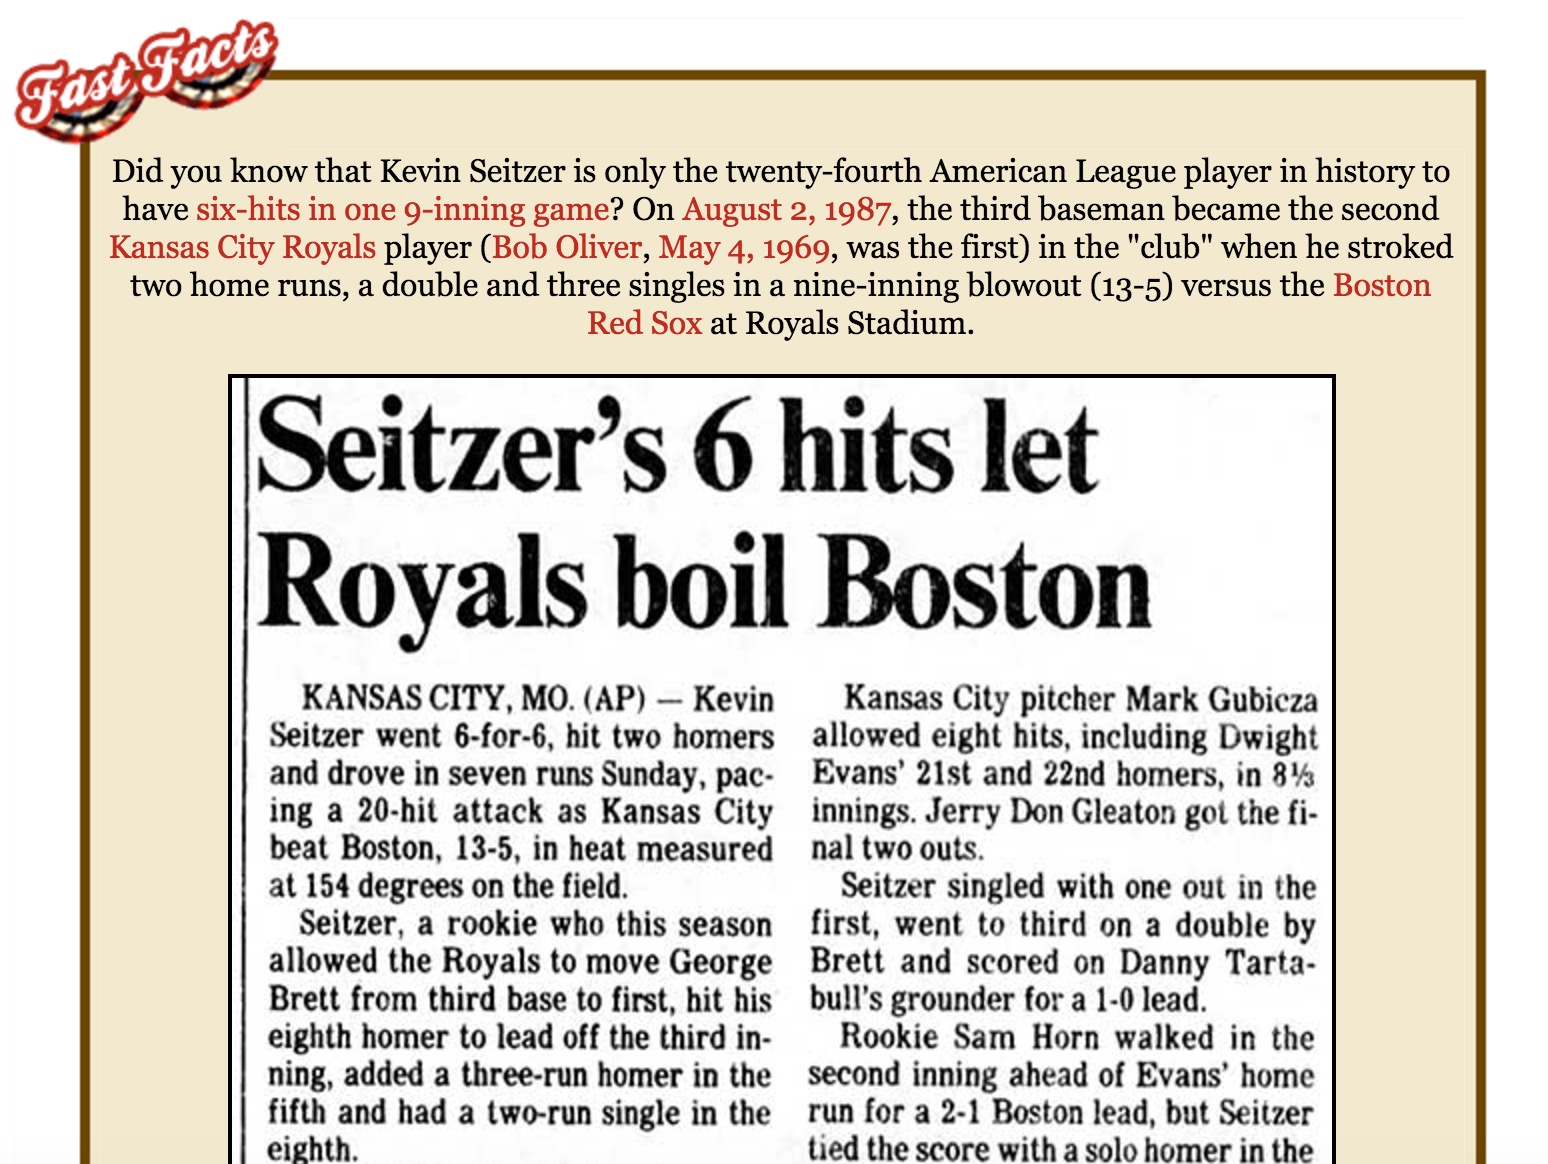 http://www.baseball-almanac.com/players/player.php?p=seitzke01 - See the whole story in the Baseball Almanac.